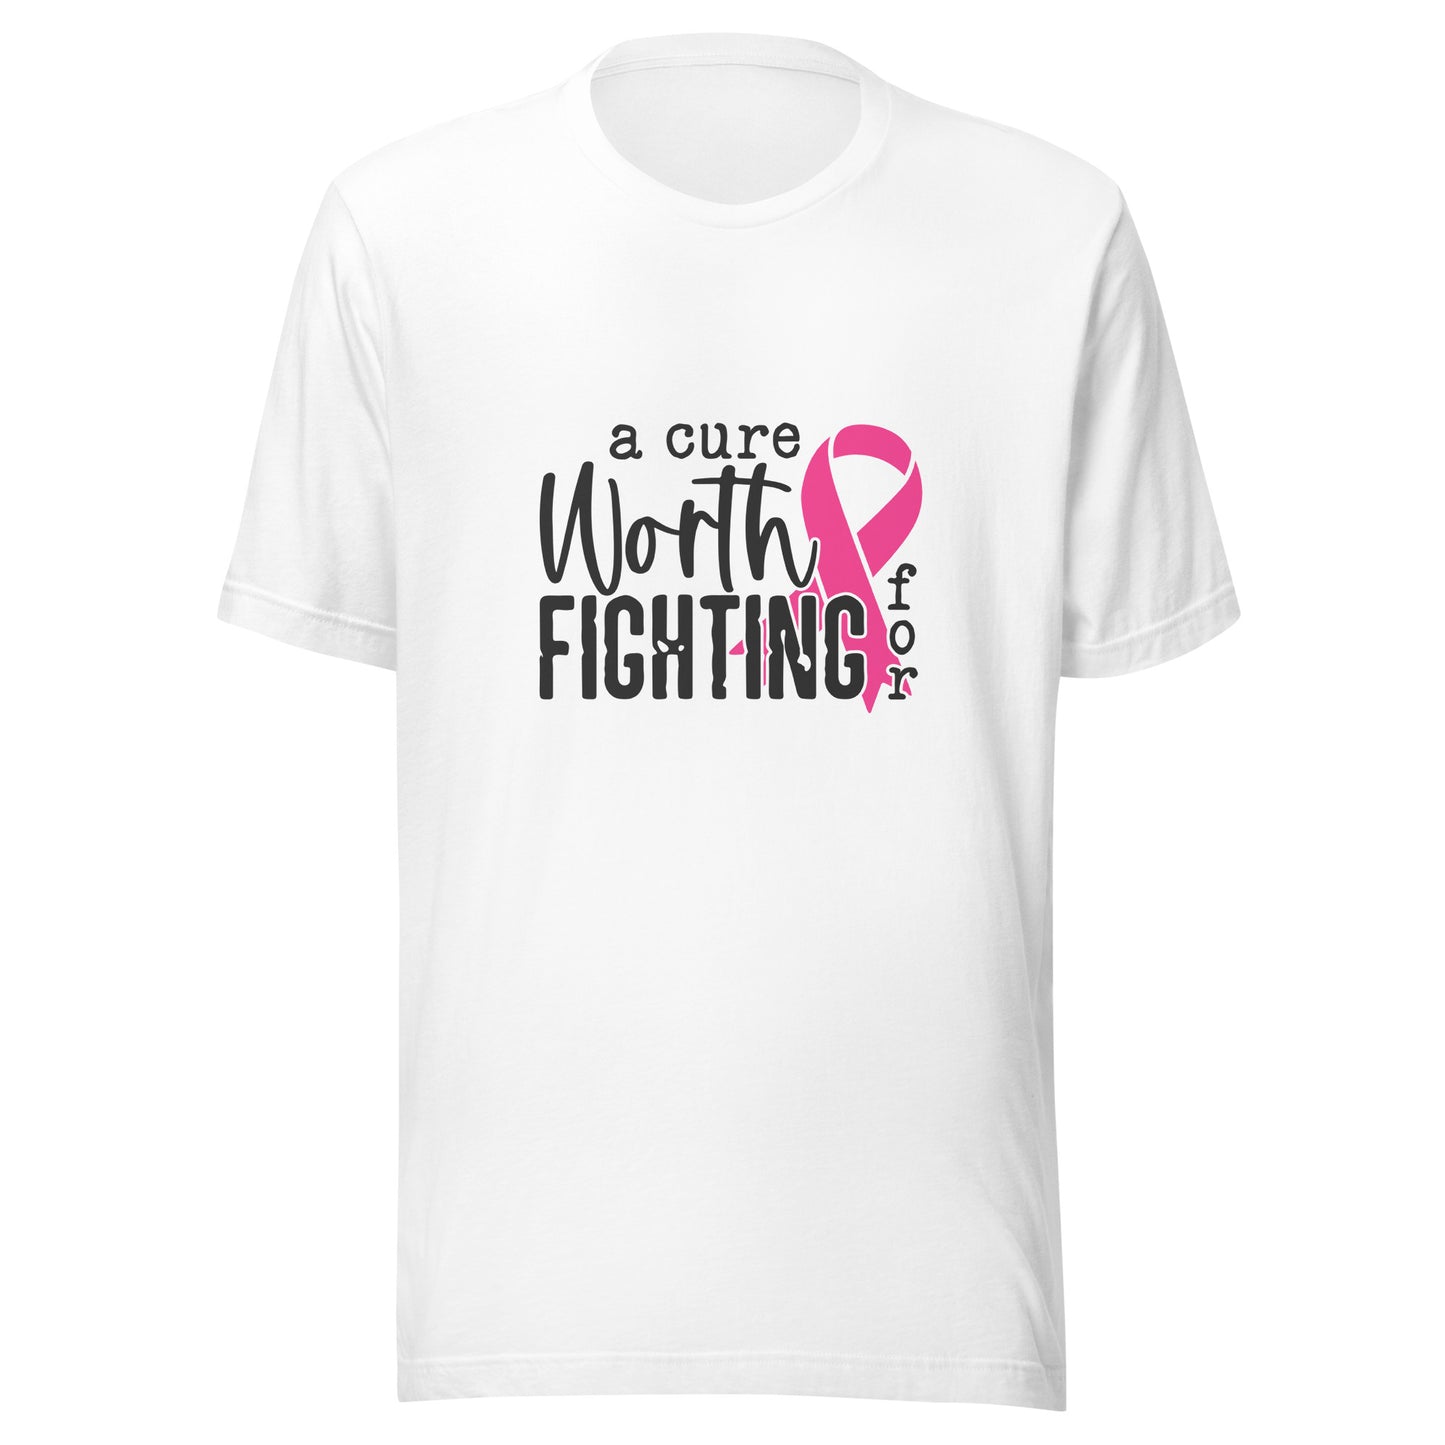 A Cure Worth Fighting For with Pink Ribbon - Breast Cancer Awareness Unisex T-shirt